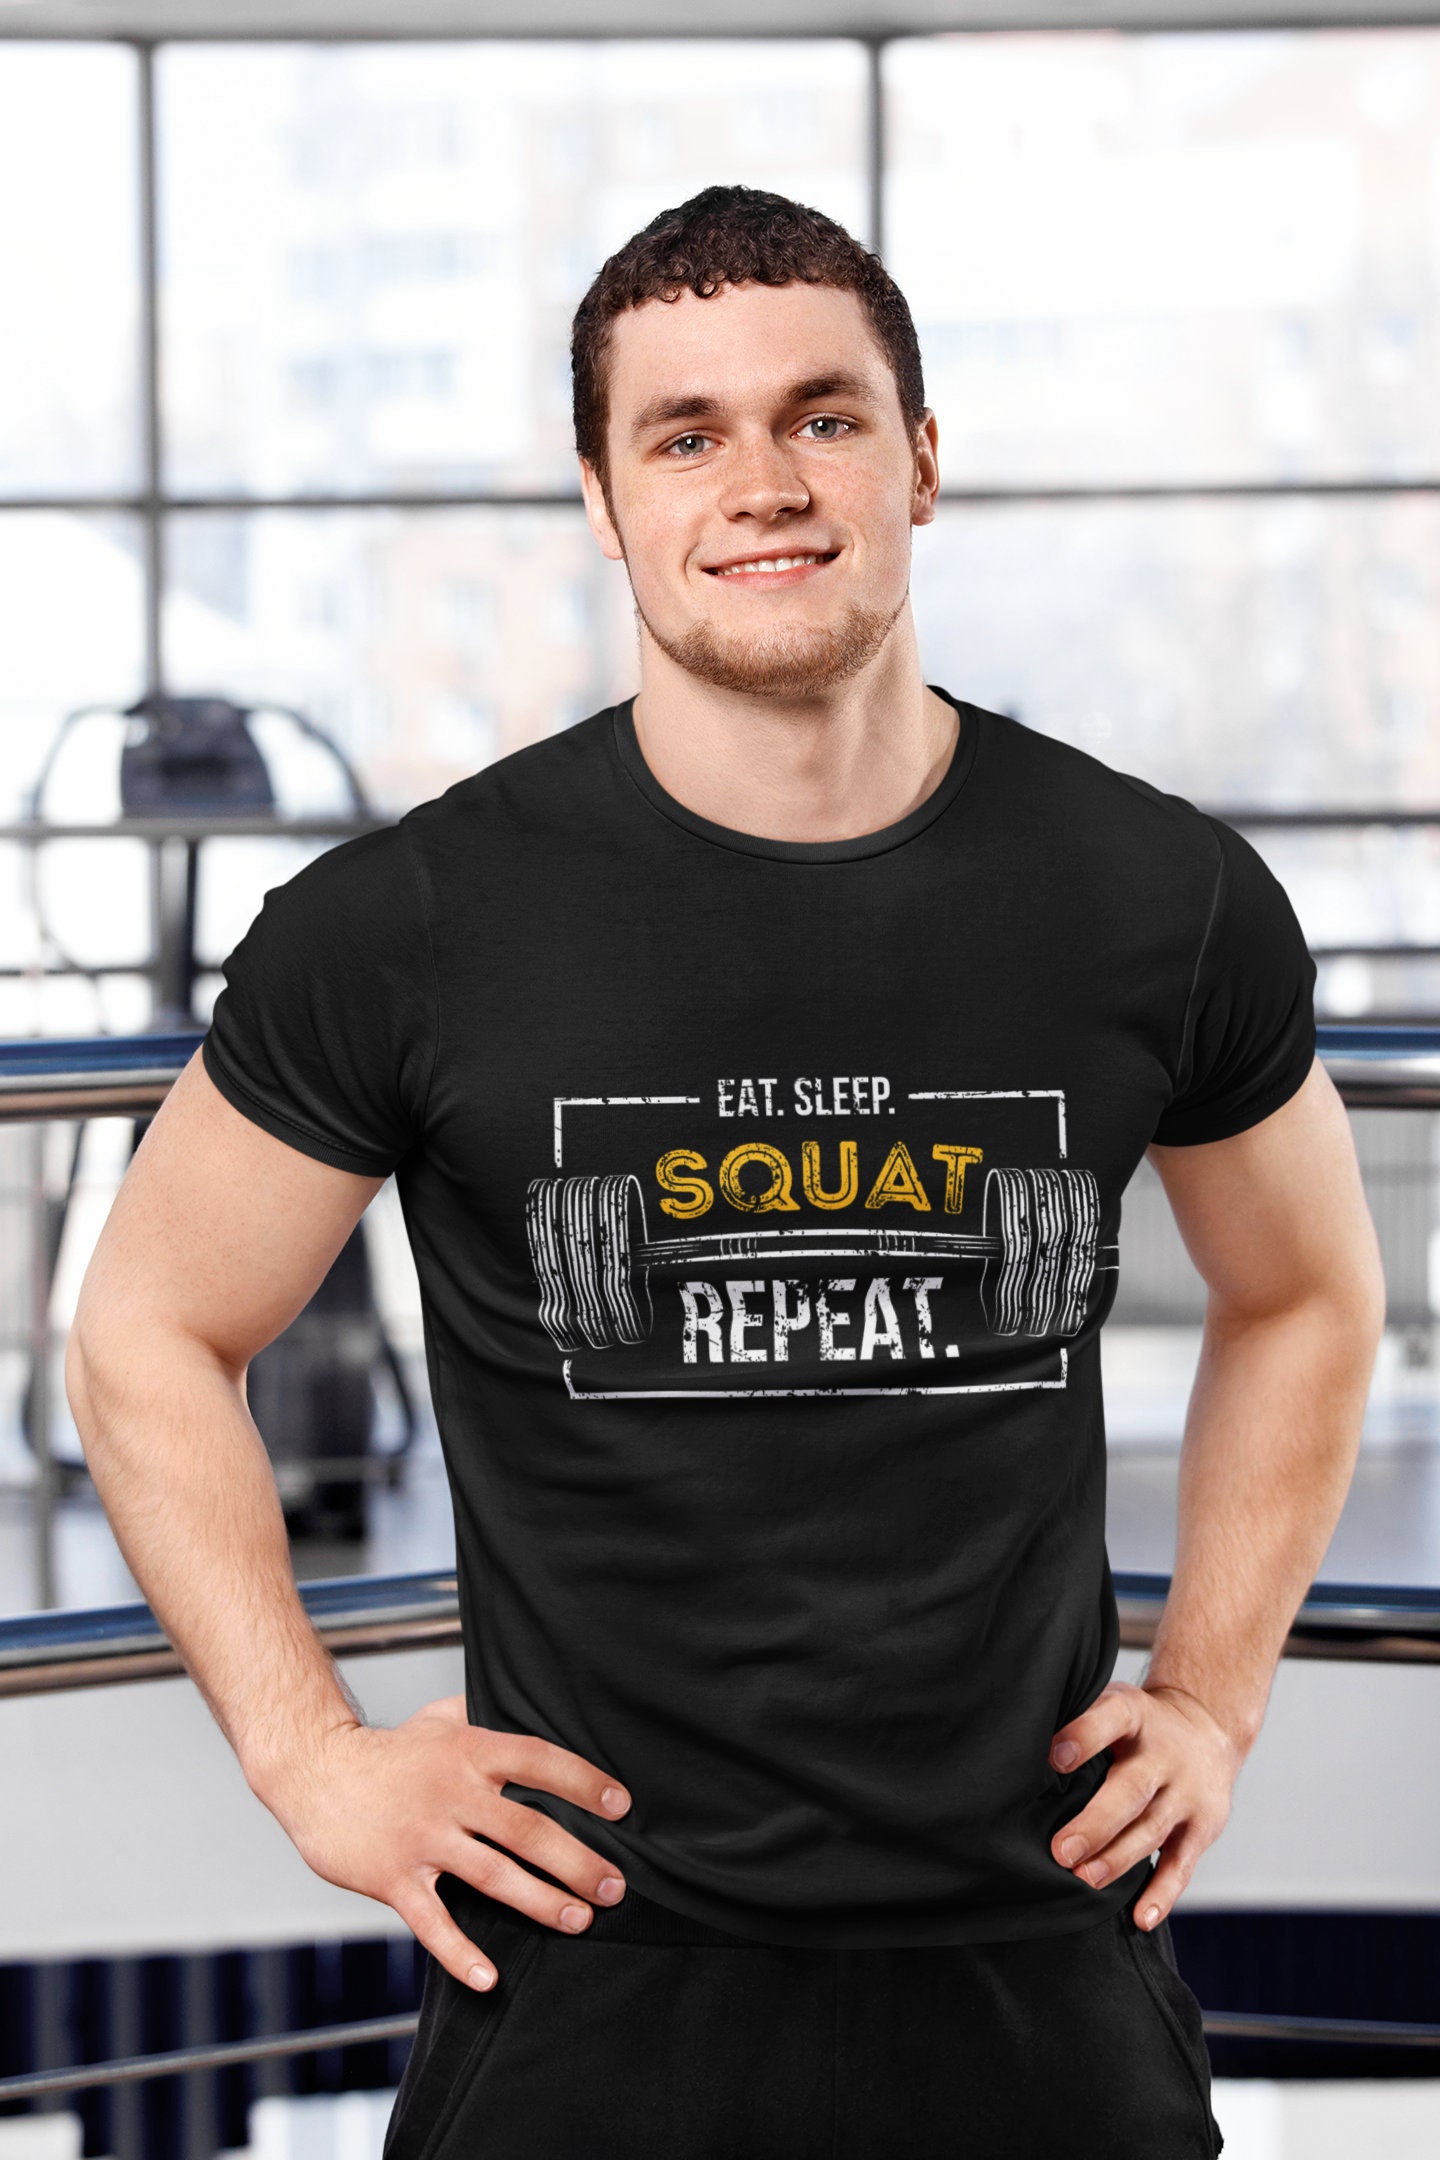 Lifting My Best Life, Gym Shirt, Gym Lovers Shirt, Gifts for Gym Lovers, Gym  Sayings, Gifts for Women, Gifts for Men, Gym Shirts, Gym Tshirt 